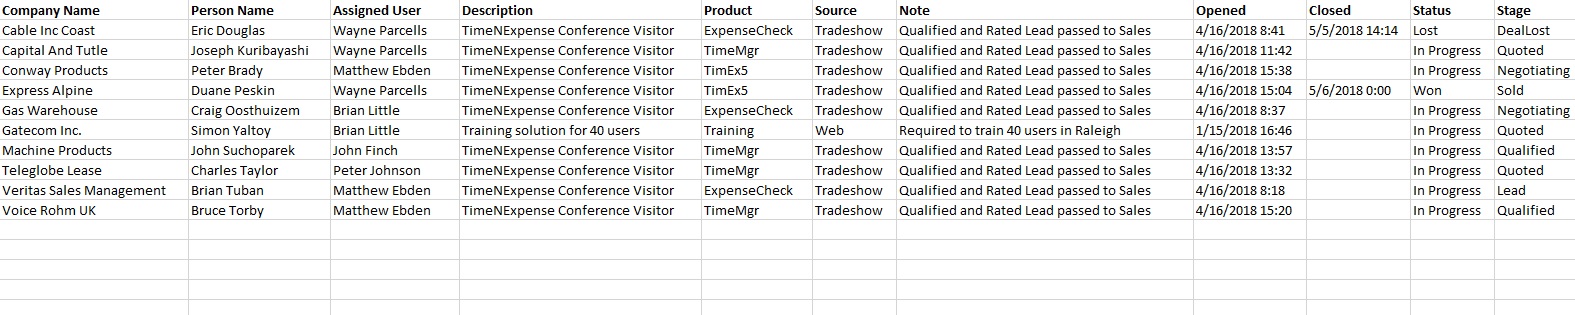 Source data in Excel_1